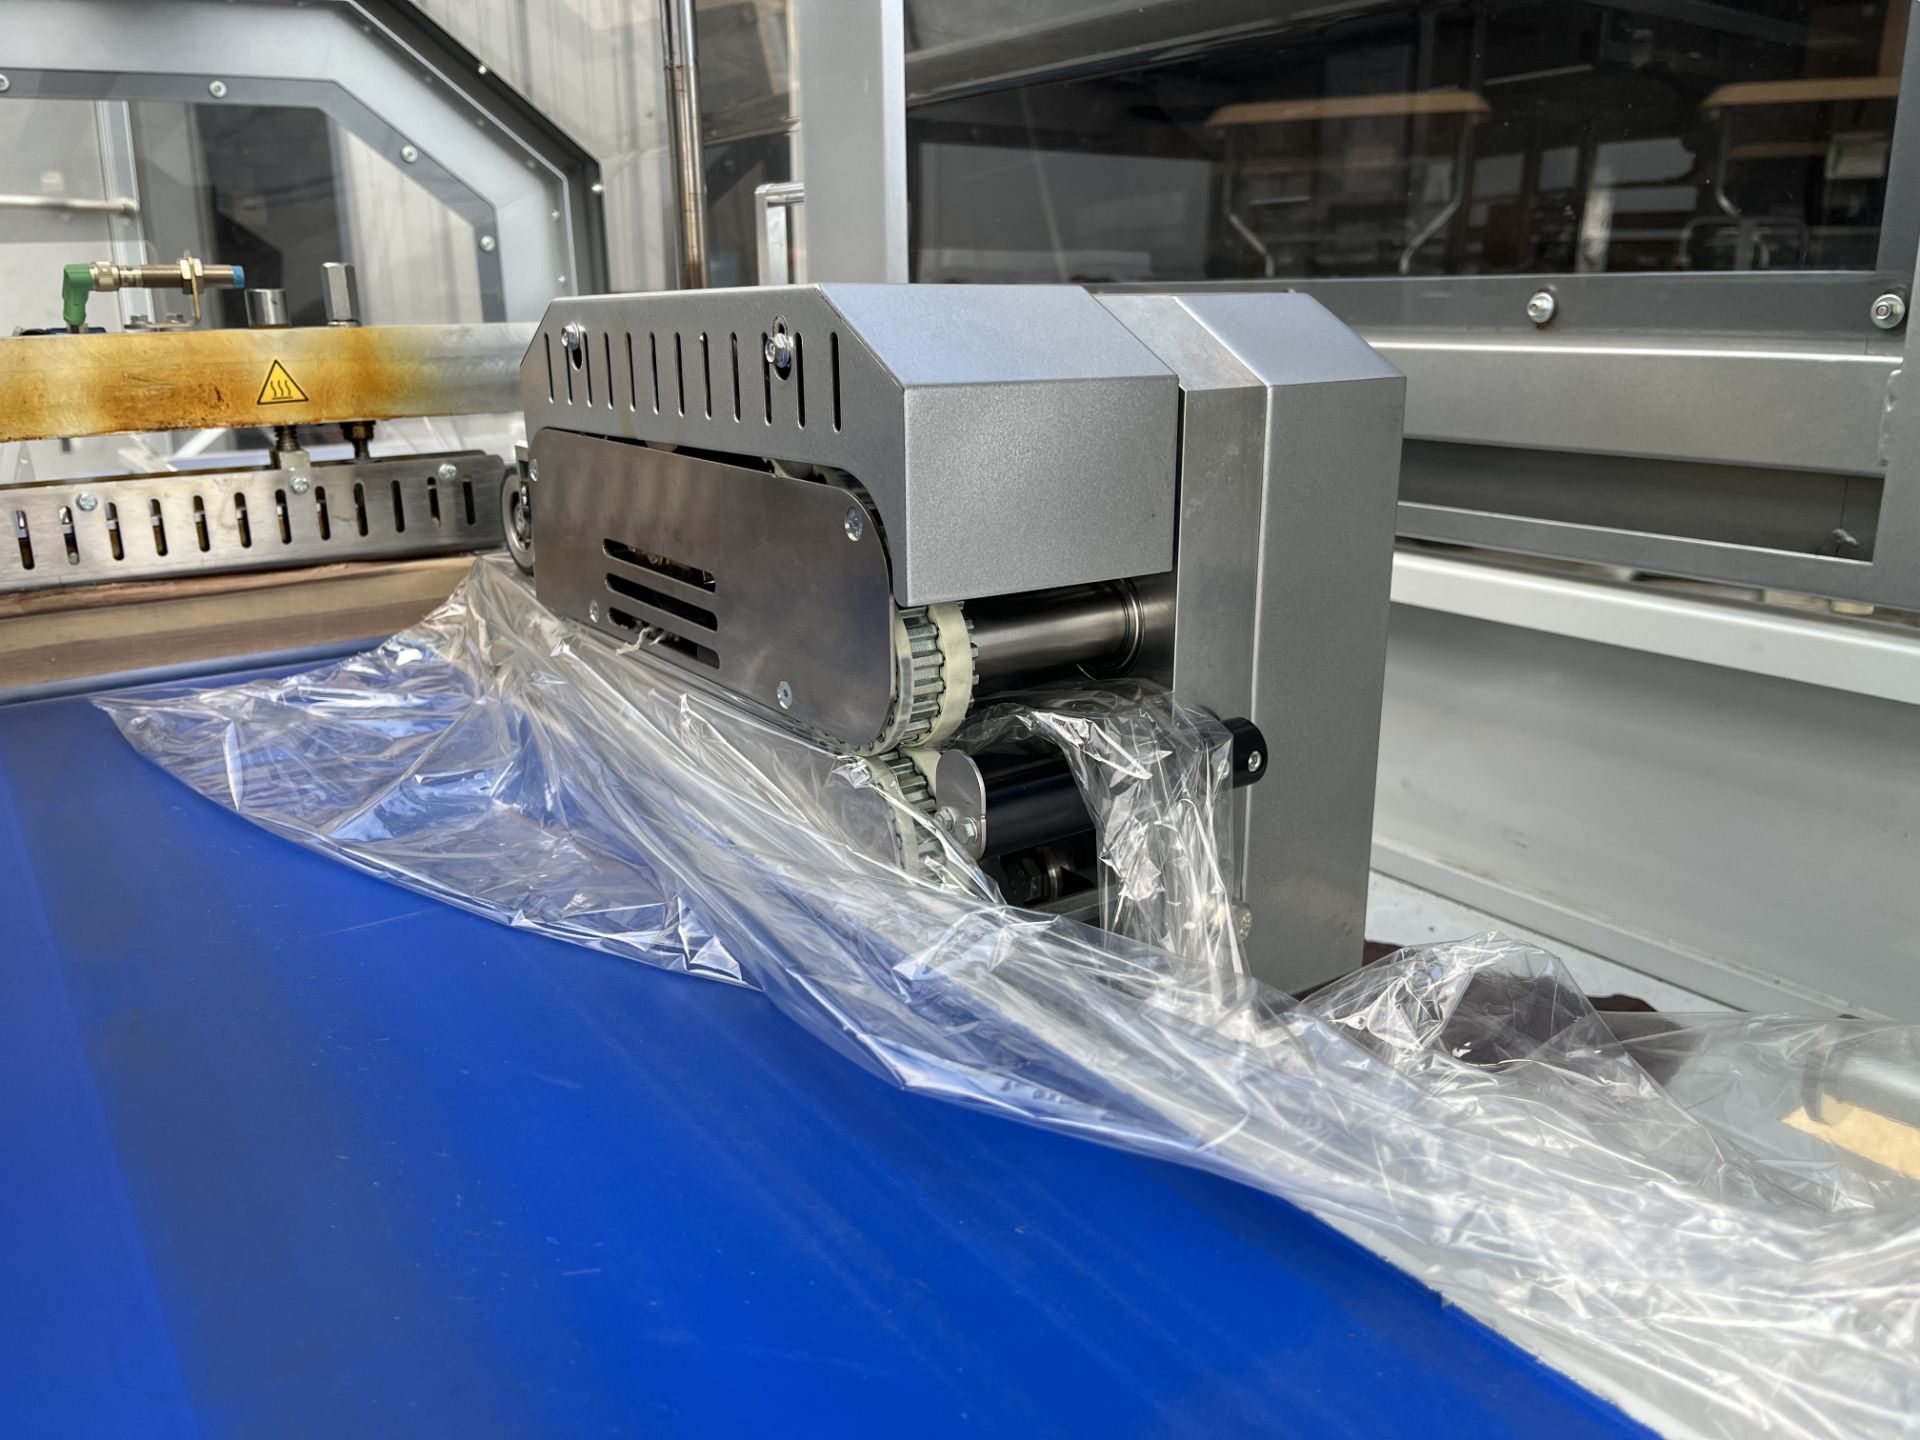 Auto Side Sealer, Heat Tunnel, and Infeed Conveyor - Image 7 of 60